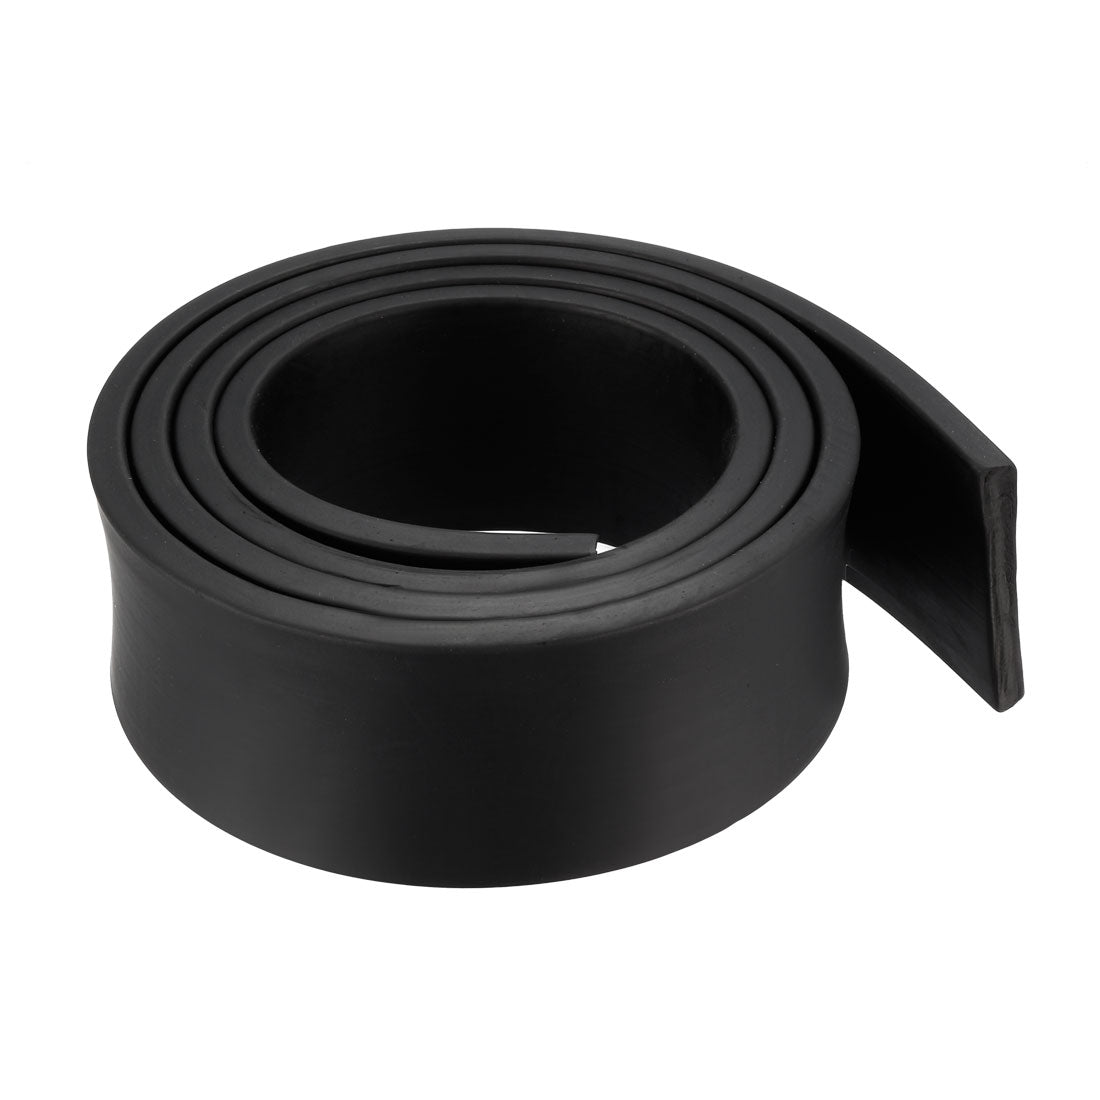 uxcell Uxcell Solid Rectangle Rubber Seal Strip 40mm Wide 5mm Thick, 1 Meter Long Black